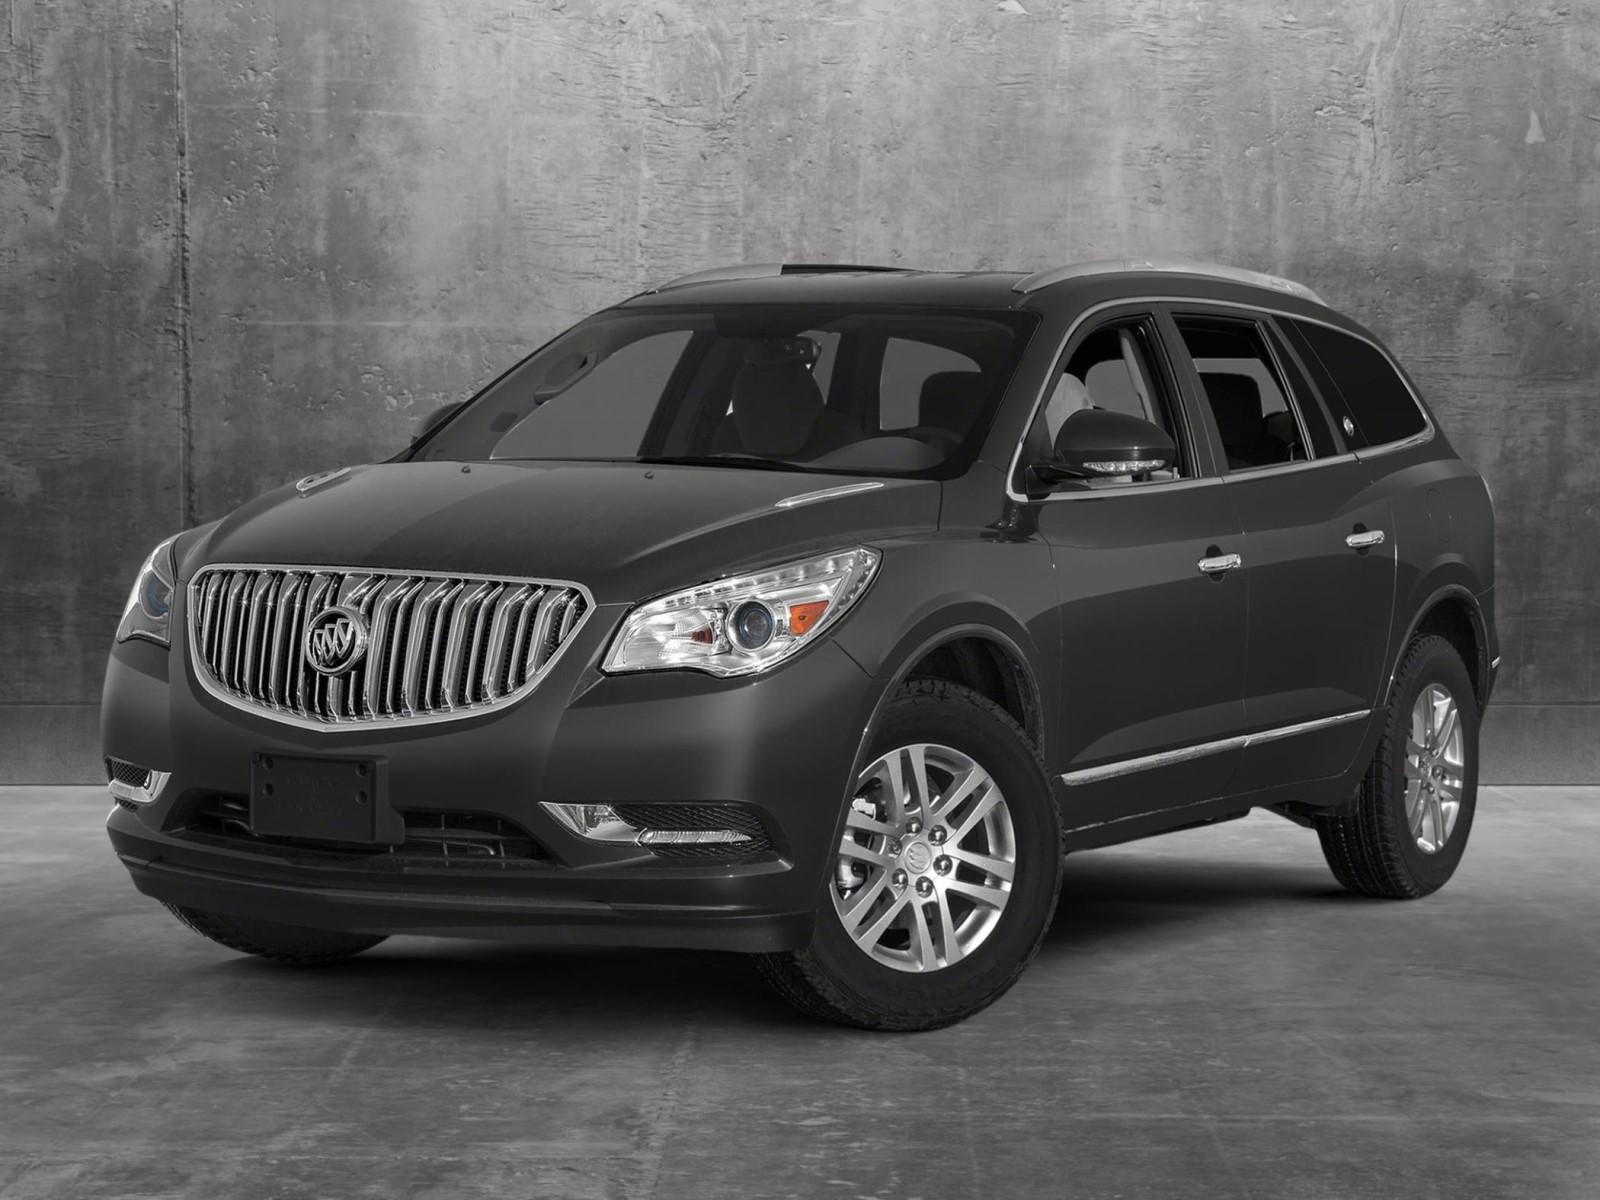 2015 Buick Enclave Vehicle Photo in Towson, MD 21204